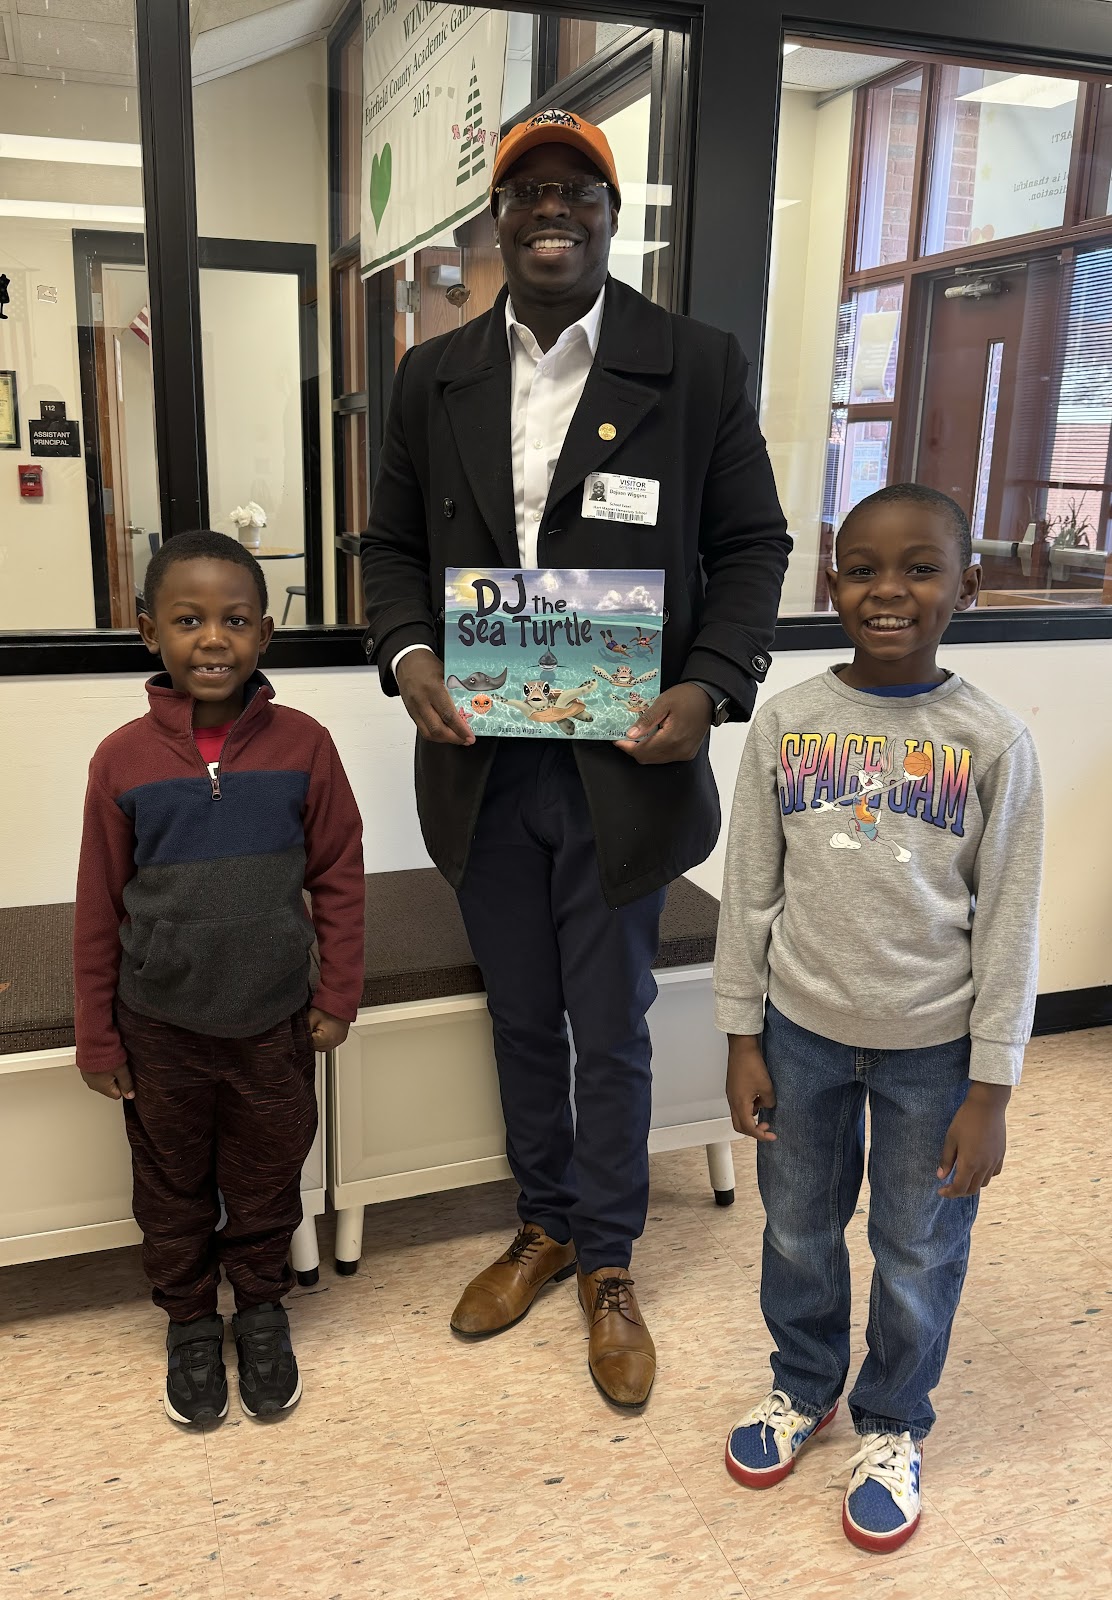 Author Mr. Wiggins with his book DJ the Sea Turtle and two Hart students